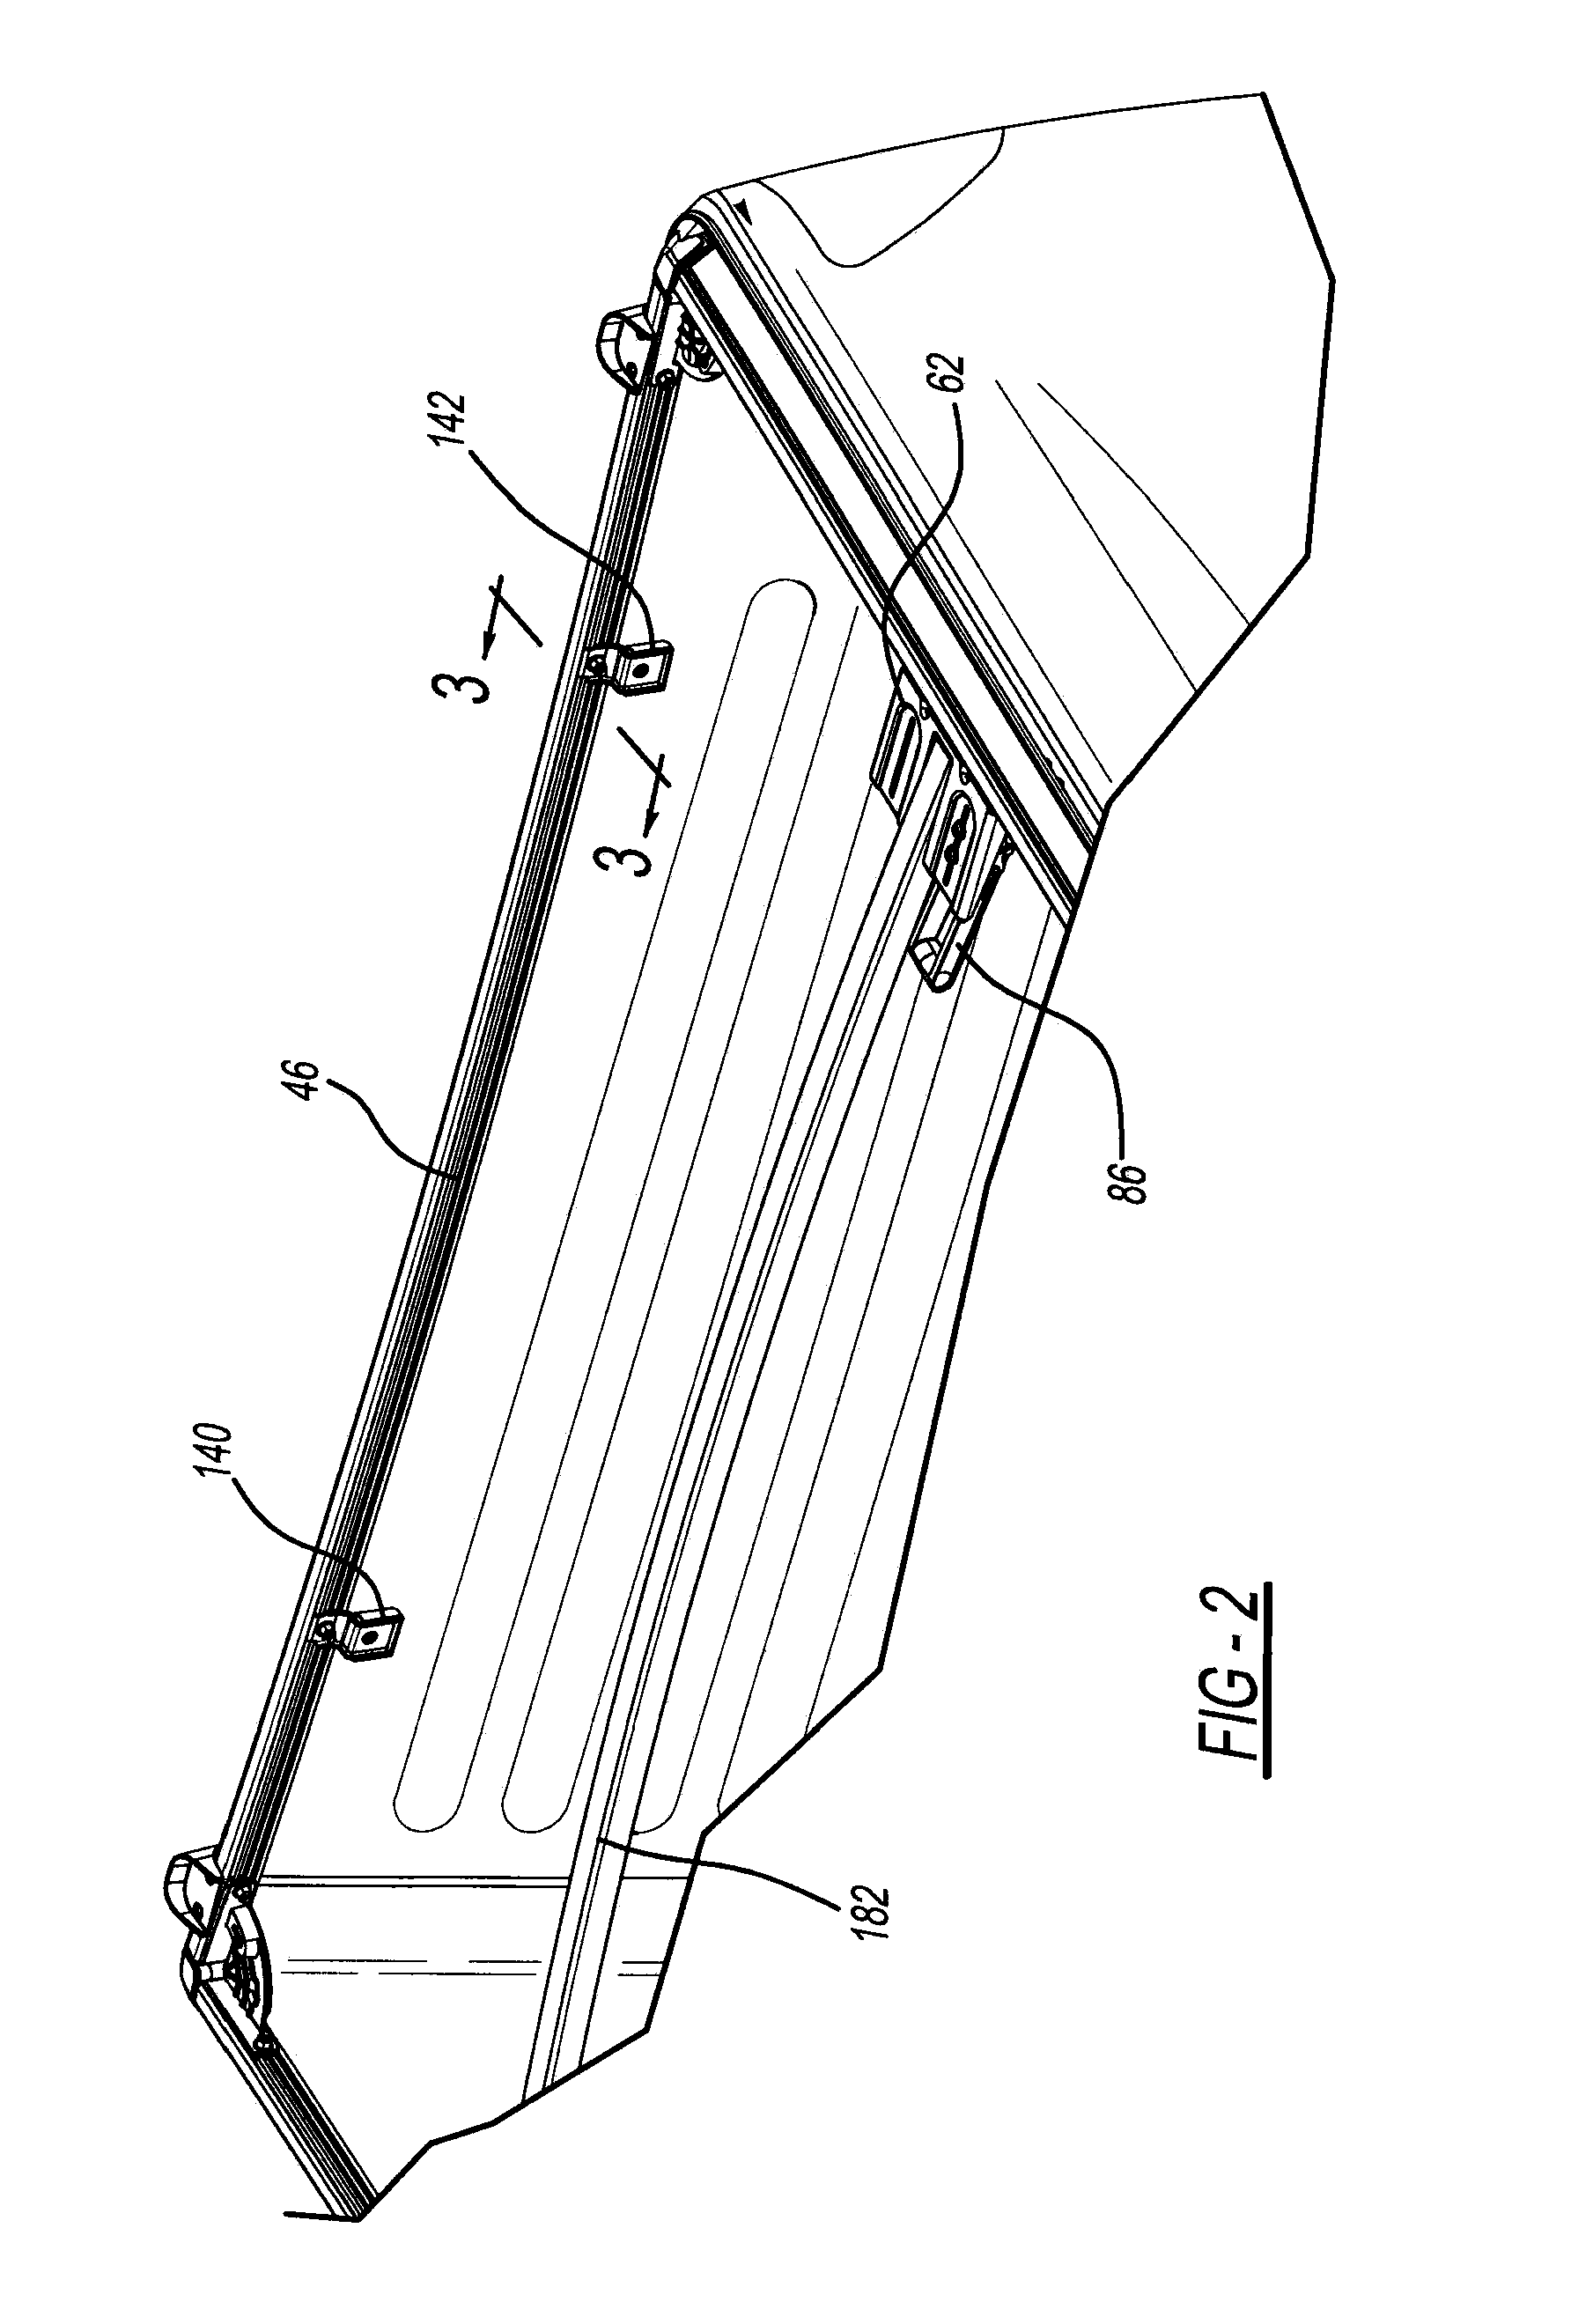 Tonneau cover apparatus for a pickup truck bed